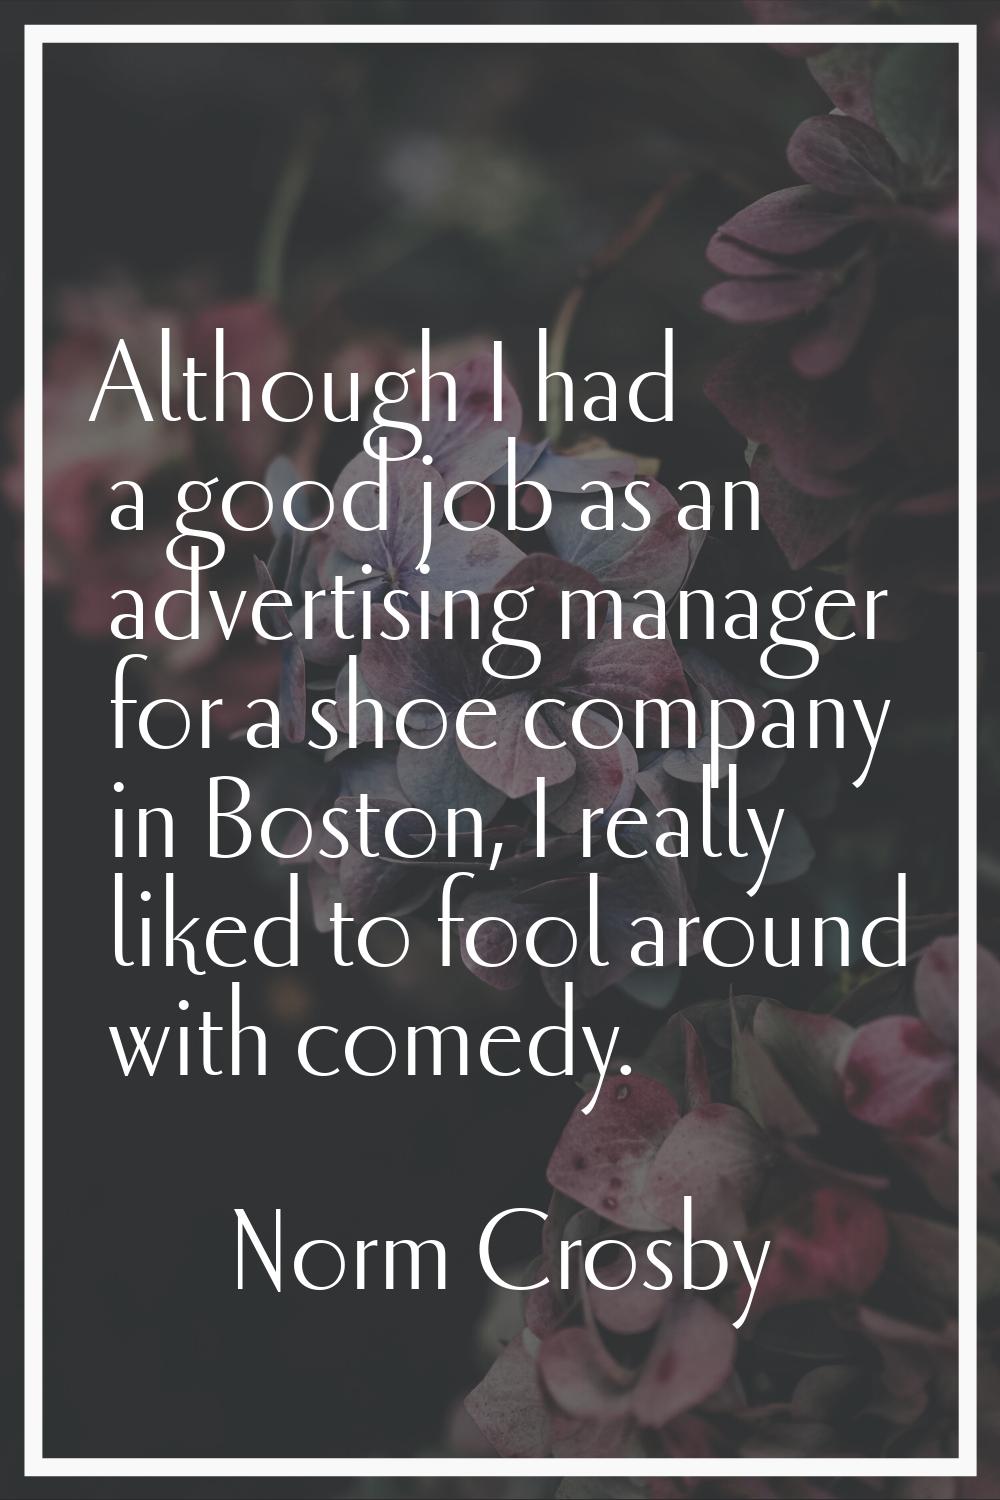 Although I had a good job as an advertising manager for a shoe company in Boston, I really liked to